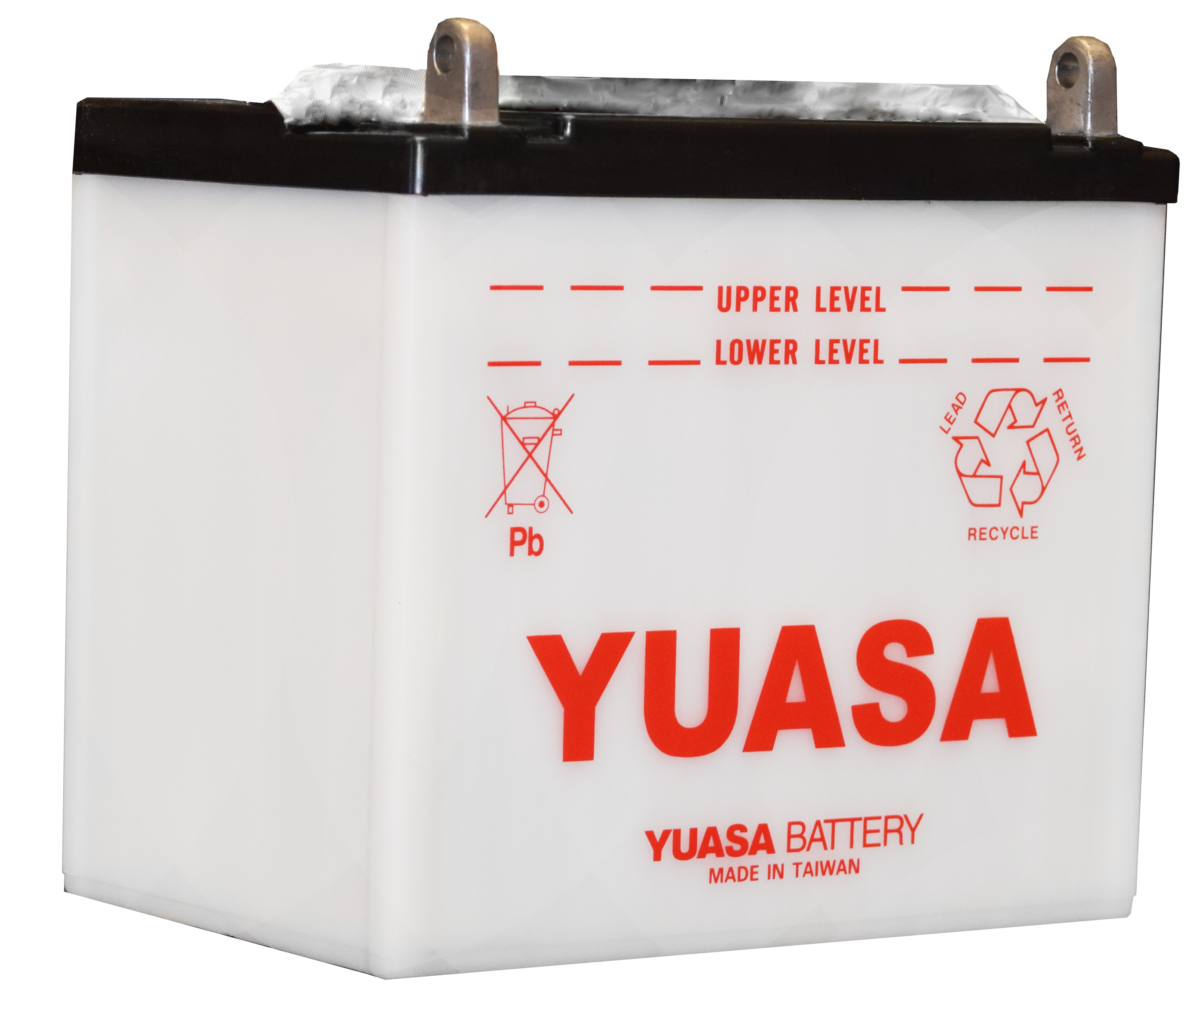 Yuasa 12N24-3 Conventional Battery for motorsports, powersports, and motorcycle